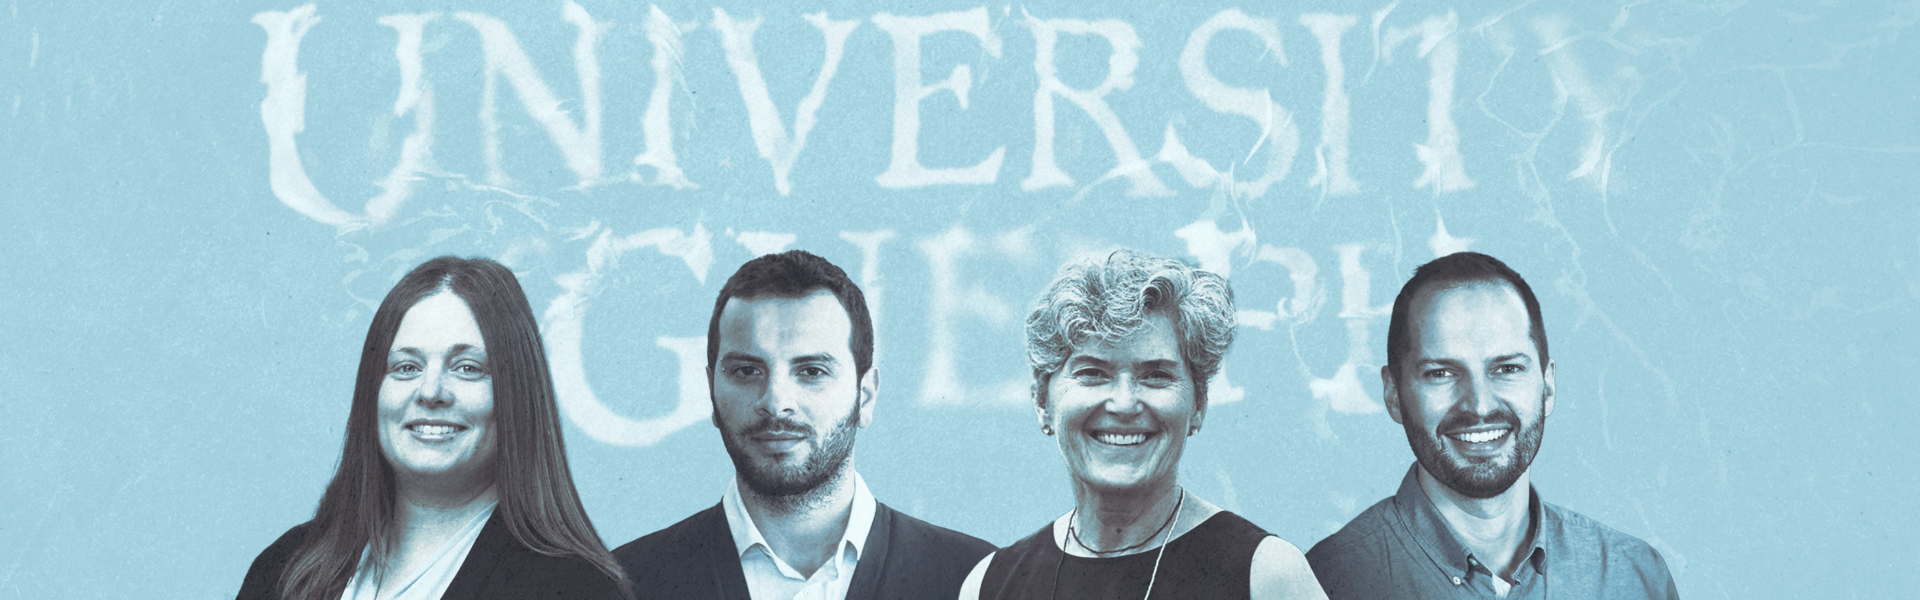 From left to right: Dr. Jana Levison, Dr. Ferdinando Manna, Dr. Beth Parker and Dr. Jonathan Munn against blue stylized water background. "University of Guelph" logo ripples behind their images.